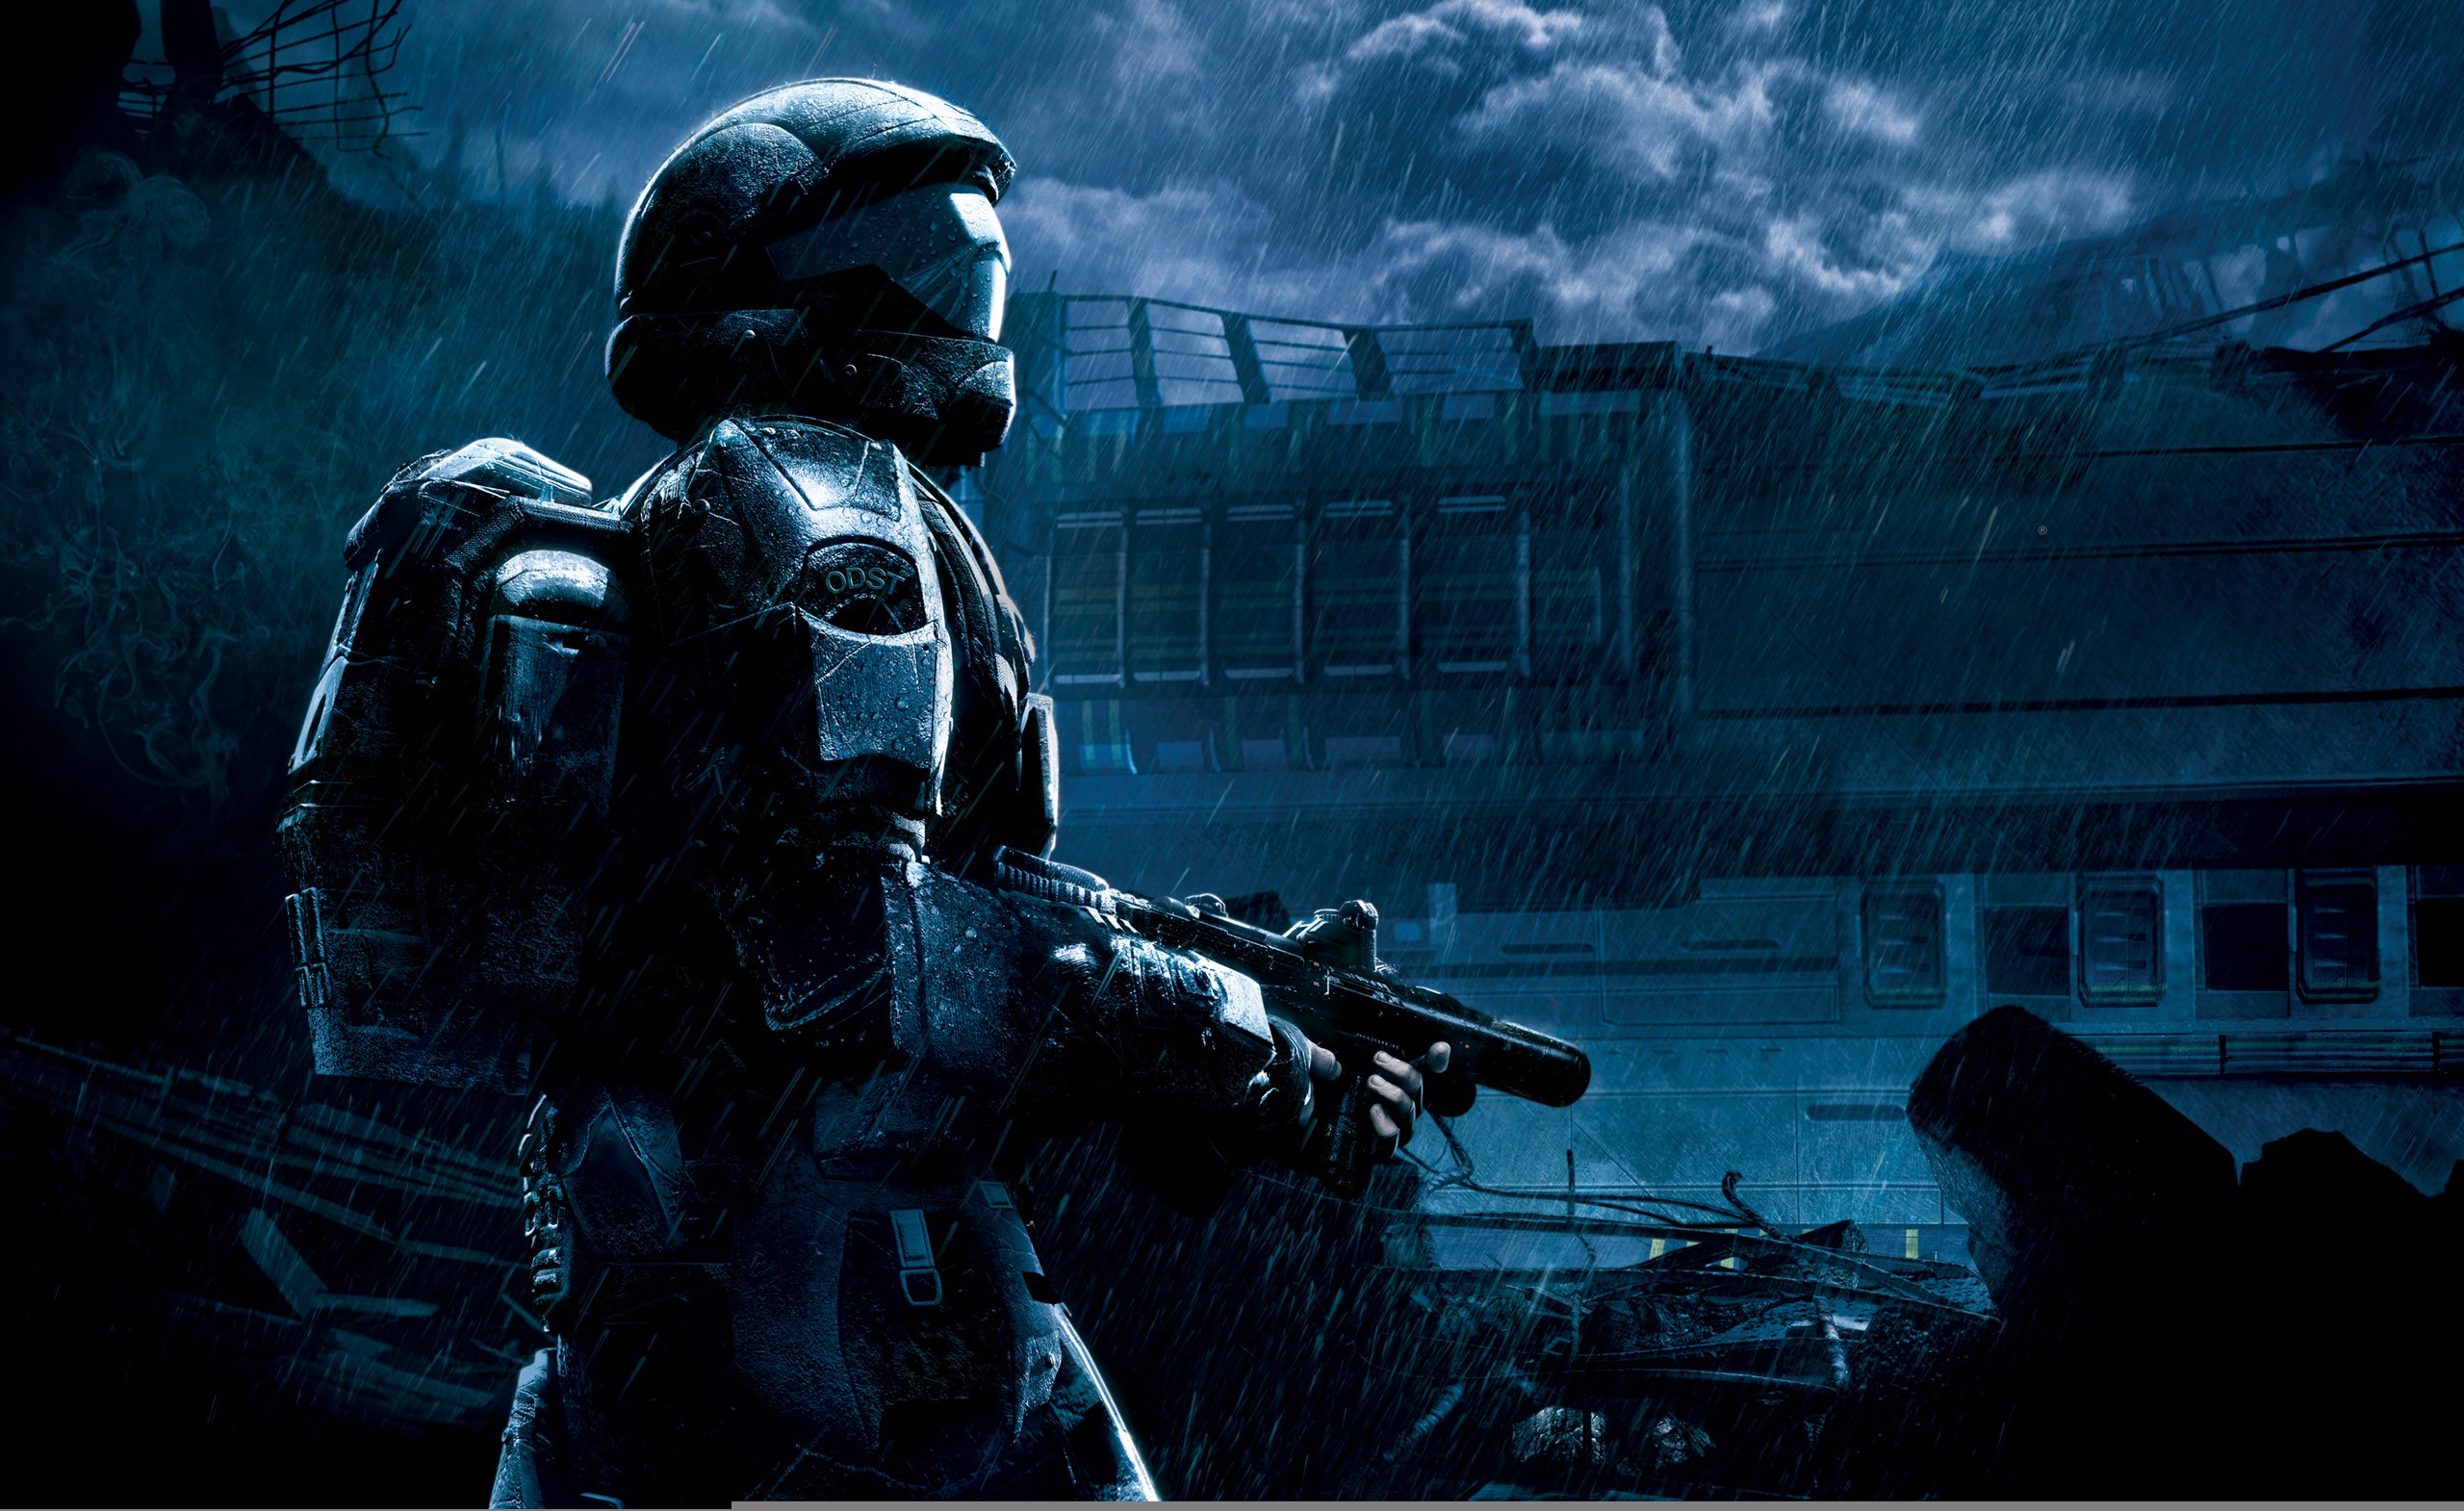 download halo 4 game for android